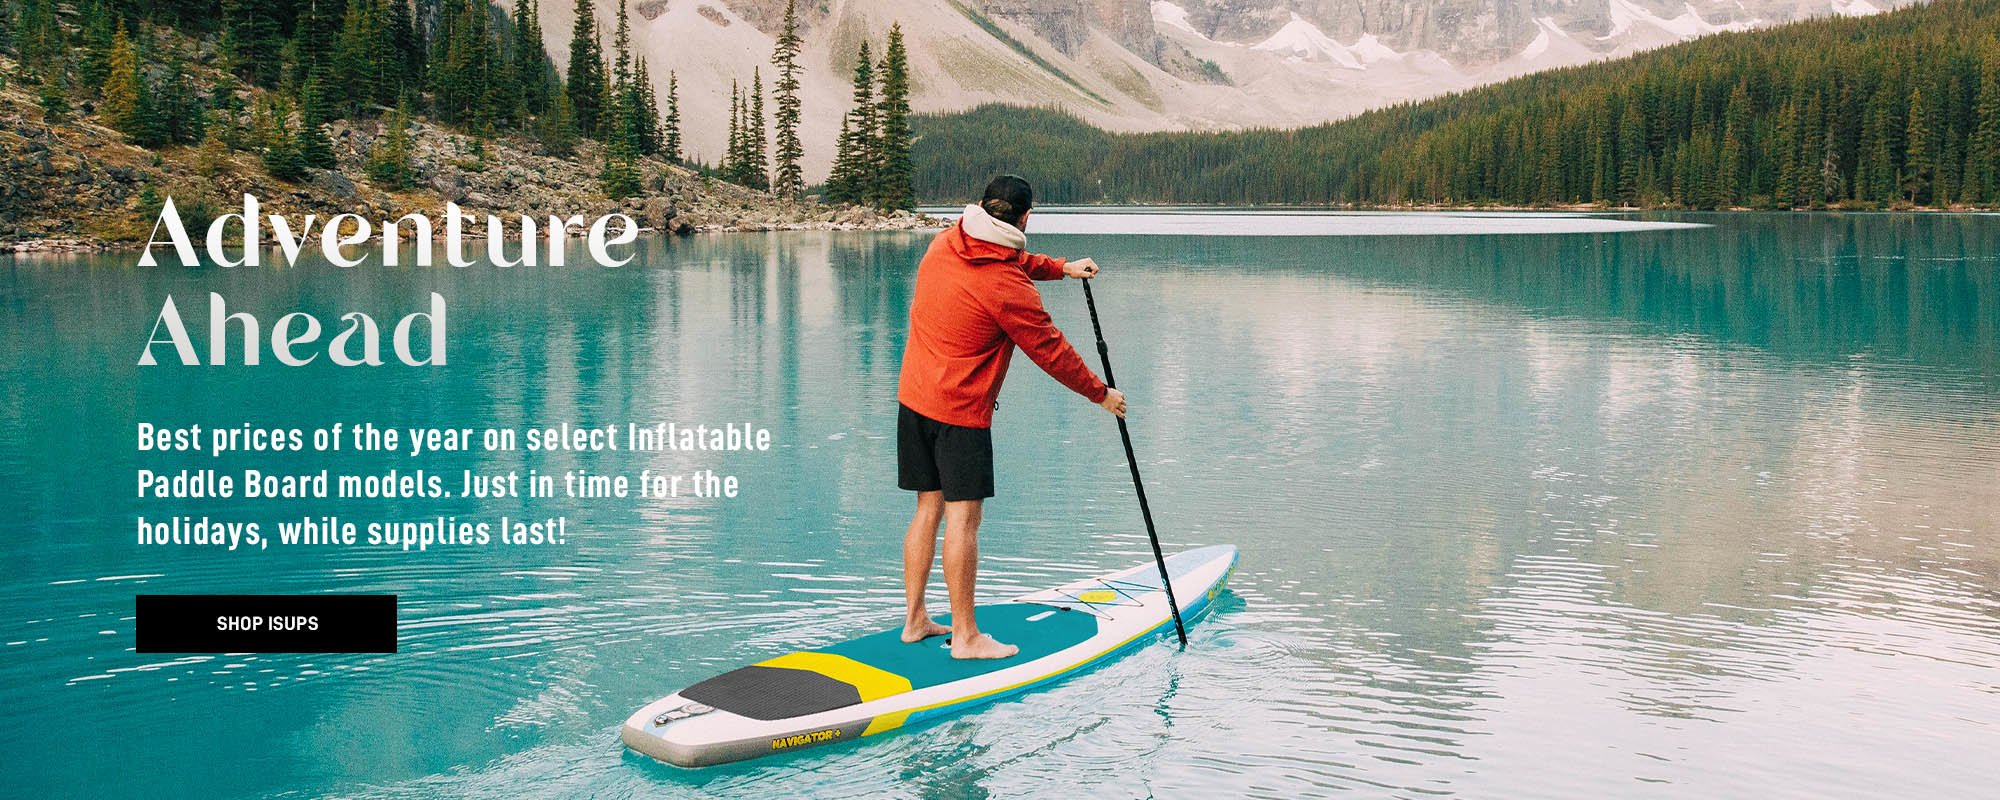 Adventure ahead - best prices of the year on select Inflatable Paddle Board models - just in time for the holidays, while supplies last - Shop ISUPS